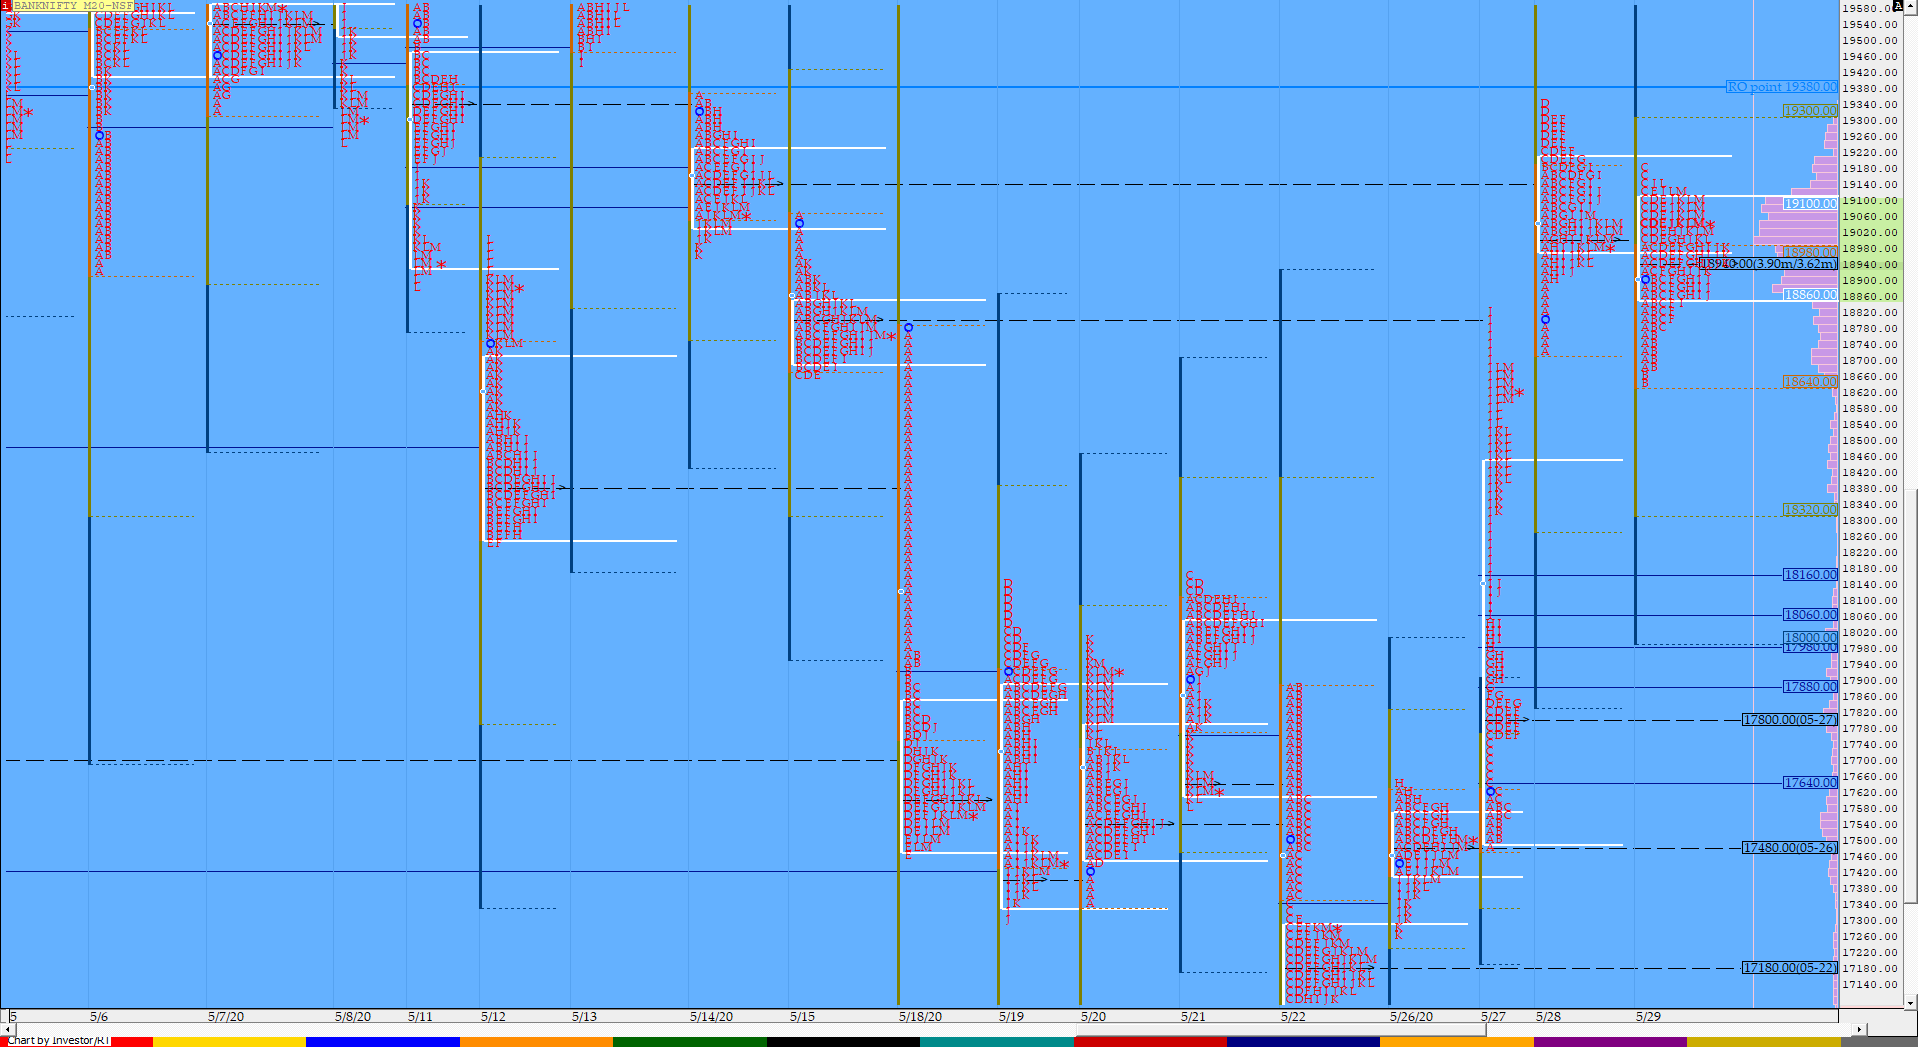 Bnf Compo1 Market Profile Analysis Dated 29Th May 2020 Banknifty Futures, Charts, Day Trading, Intraday Trading, Intraday Trading Strategies, Market Profile, Market Profile Trading Strategies, Nifty Futures, Order Flow Analysis, Support And Resistance, Technical Analysis, Trading Strategies, Volume Profile Trading